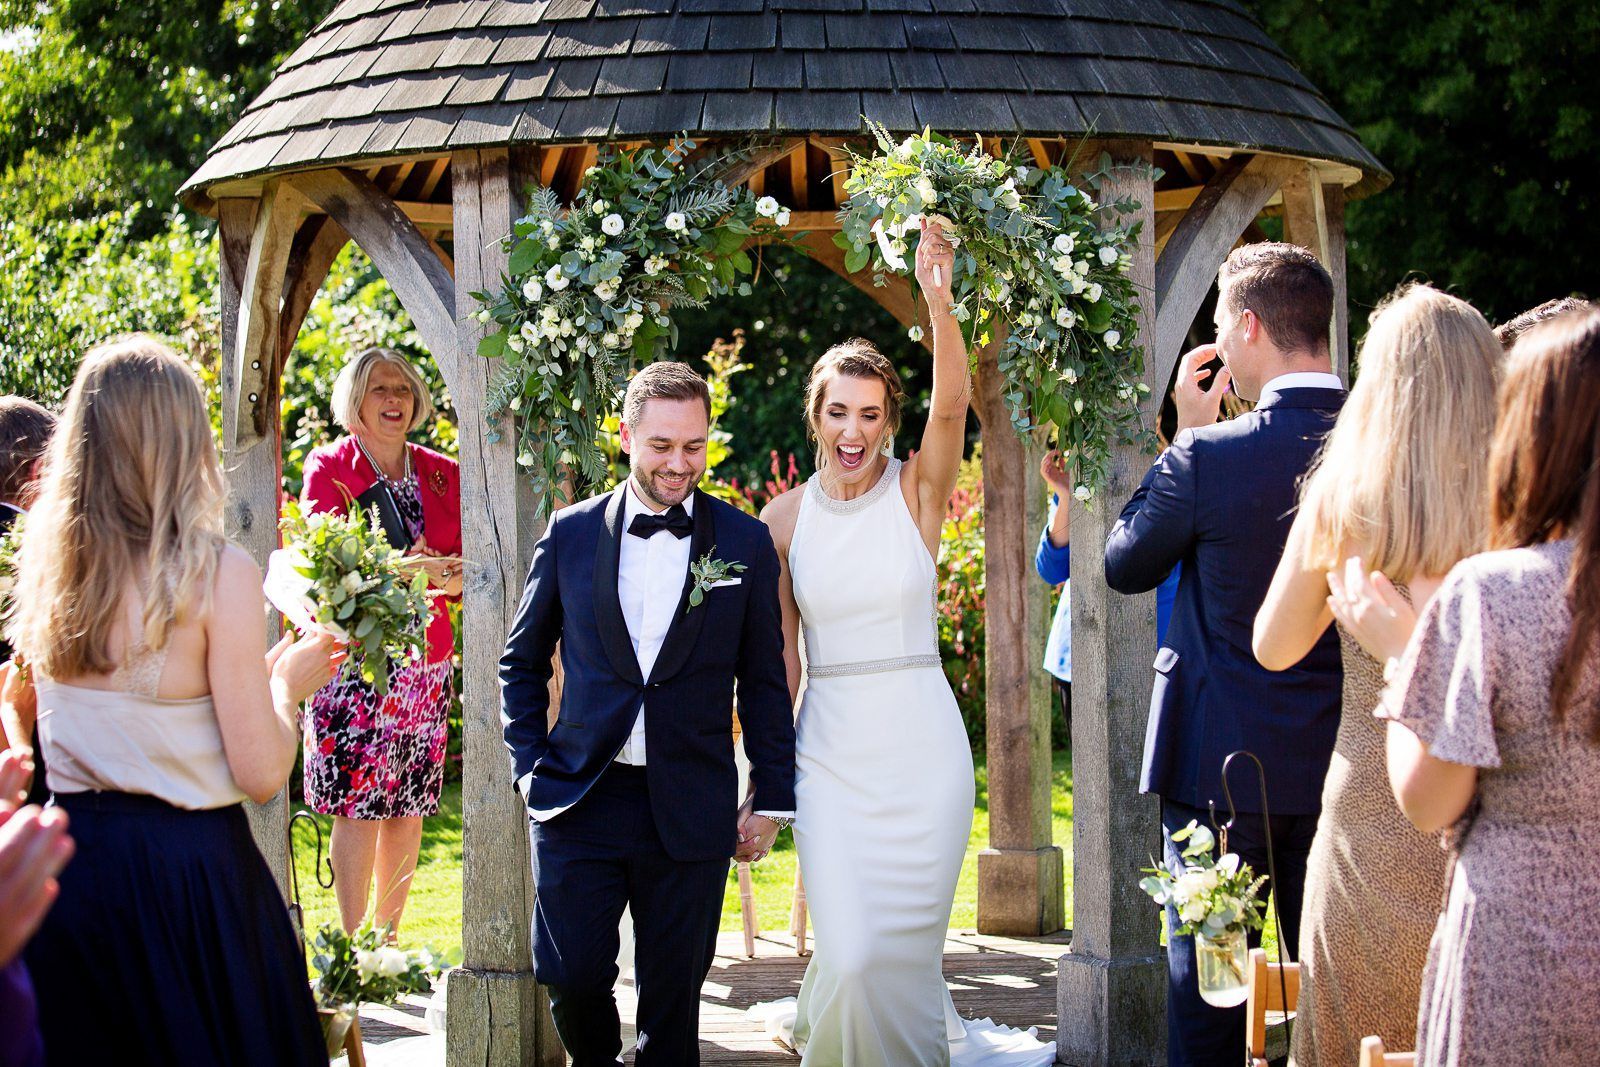 A bride and groom are walking down the aisle at their wedding under a gazebo.